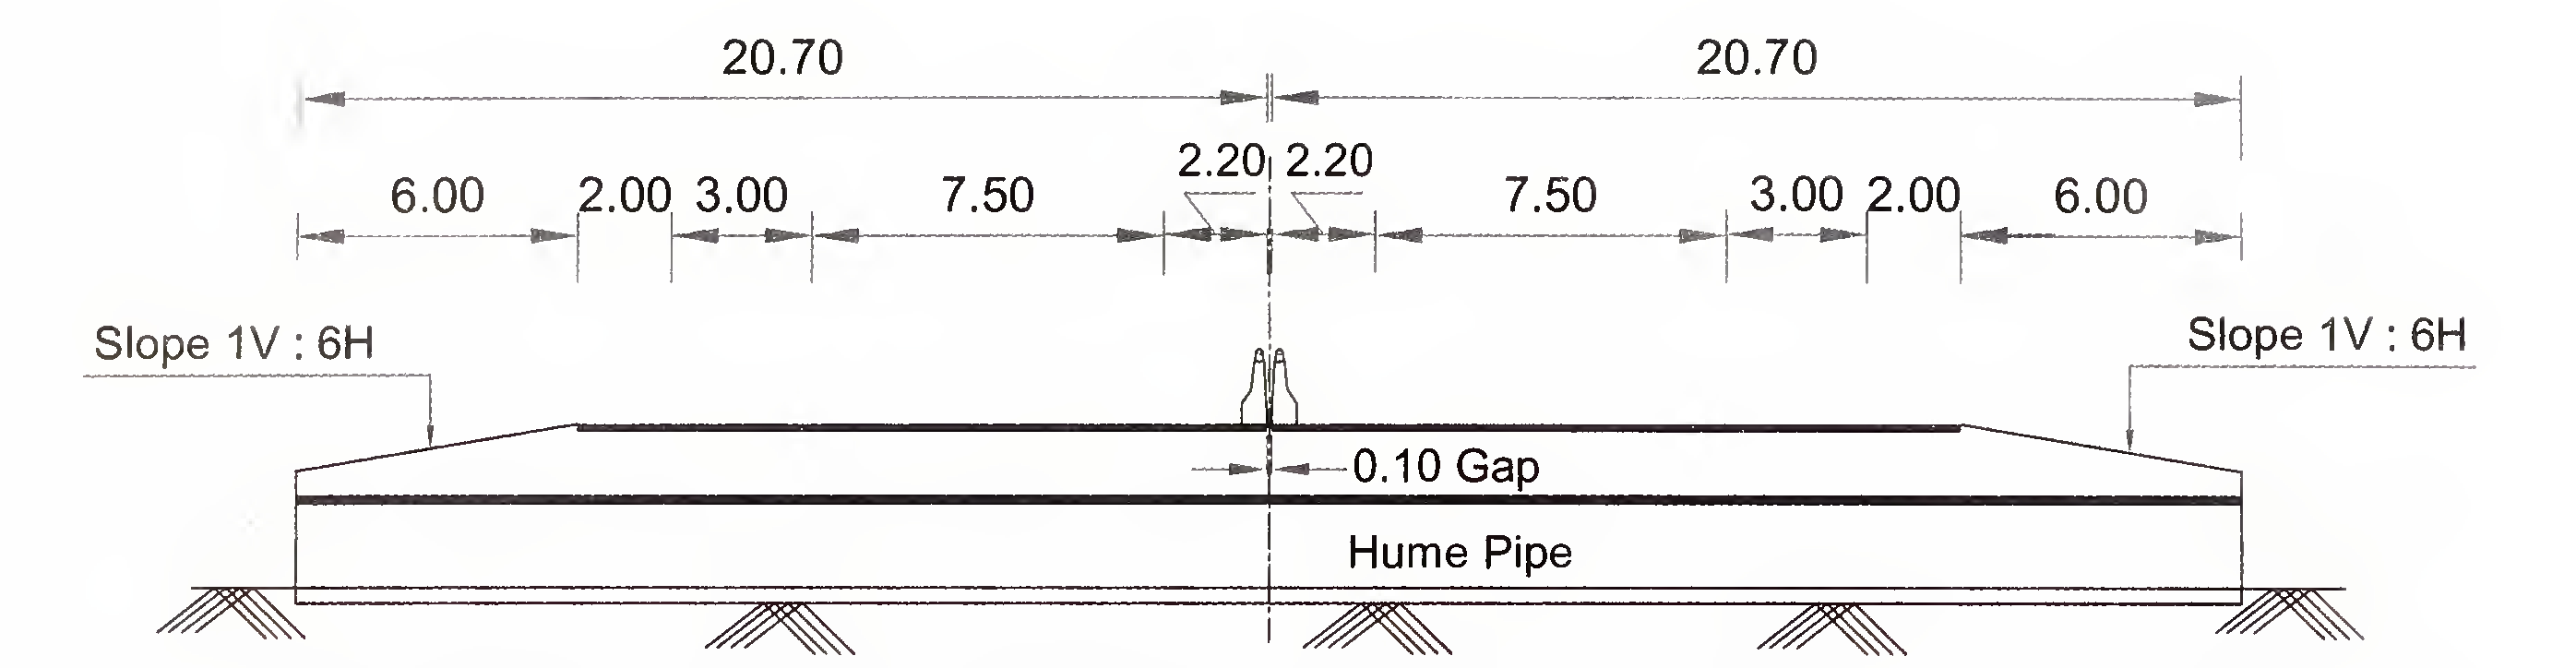 Fig. 6.2 (b) Typical Cross-section of Pipe Culvert for 6-Lane (2×3) Expressway with Flush Median